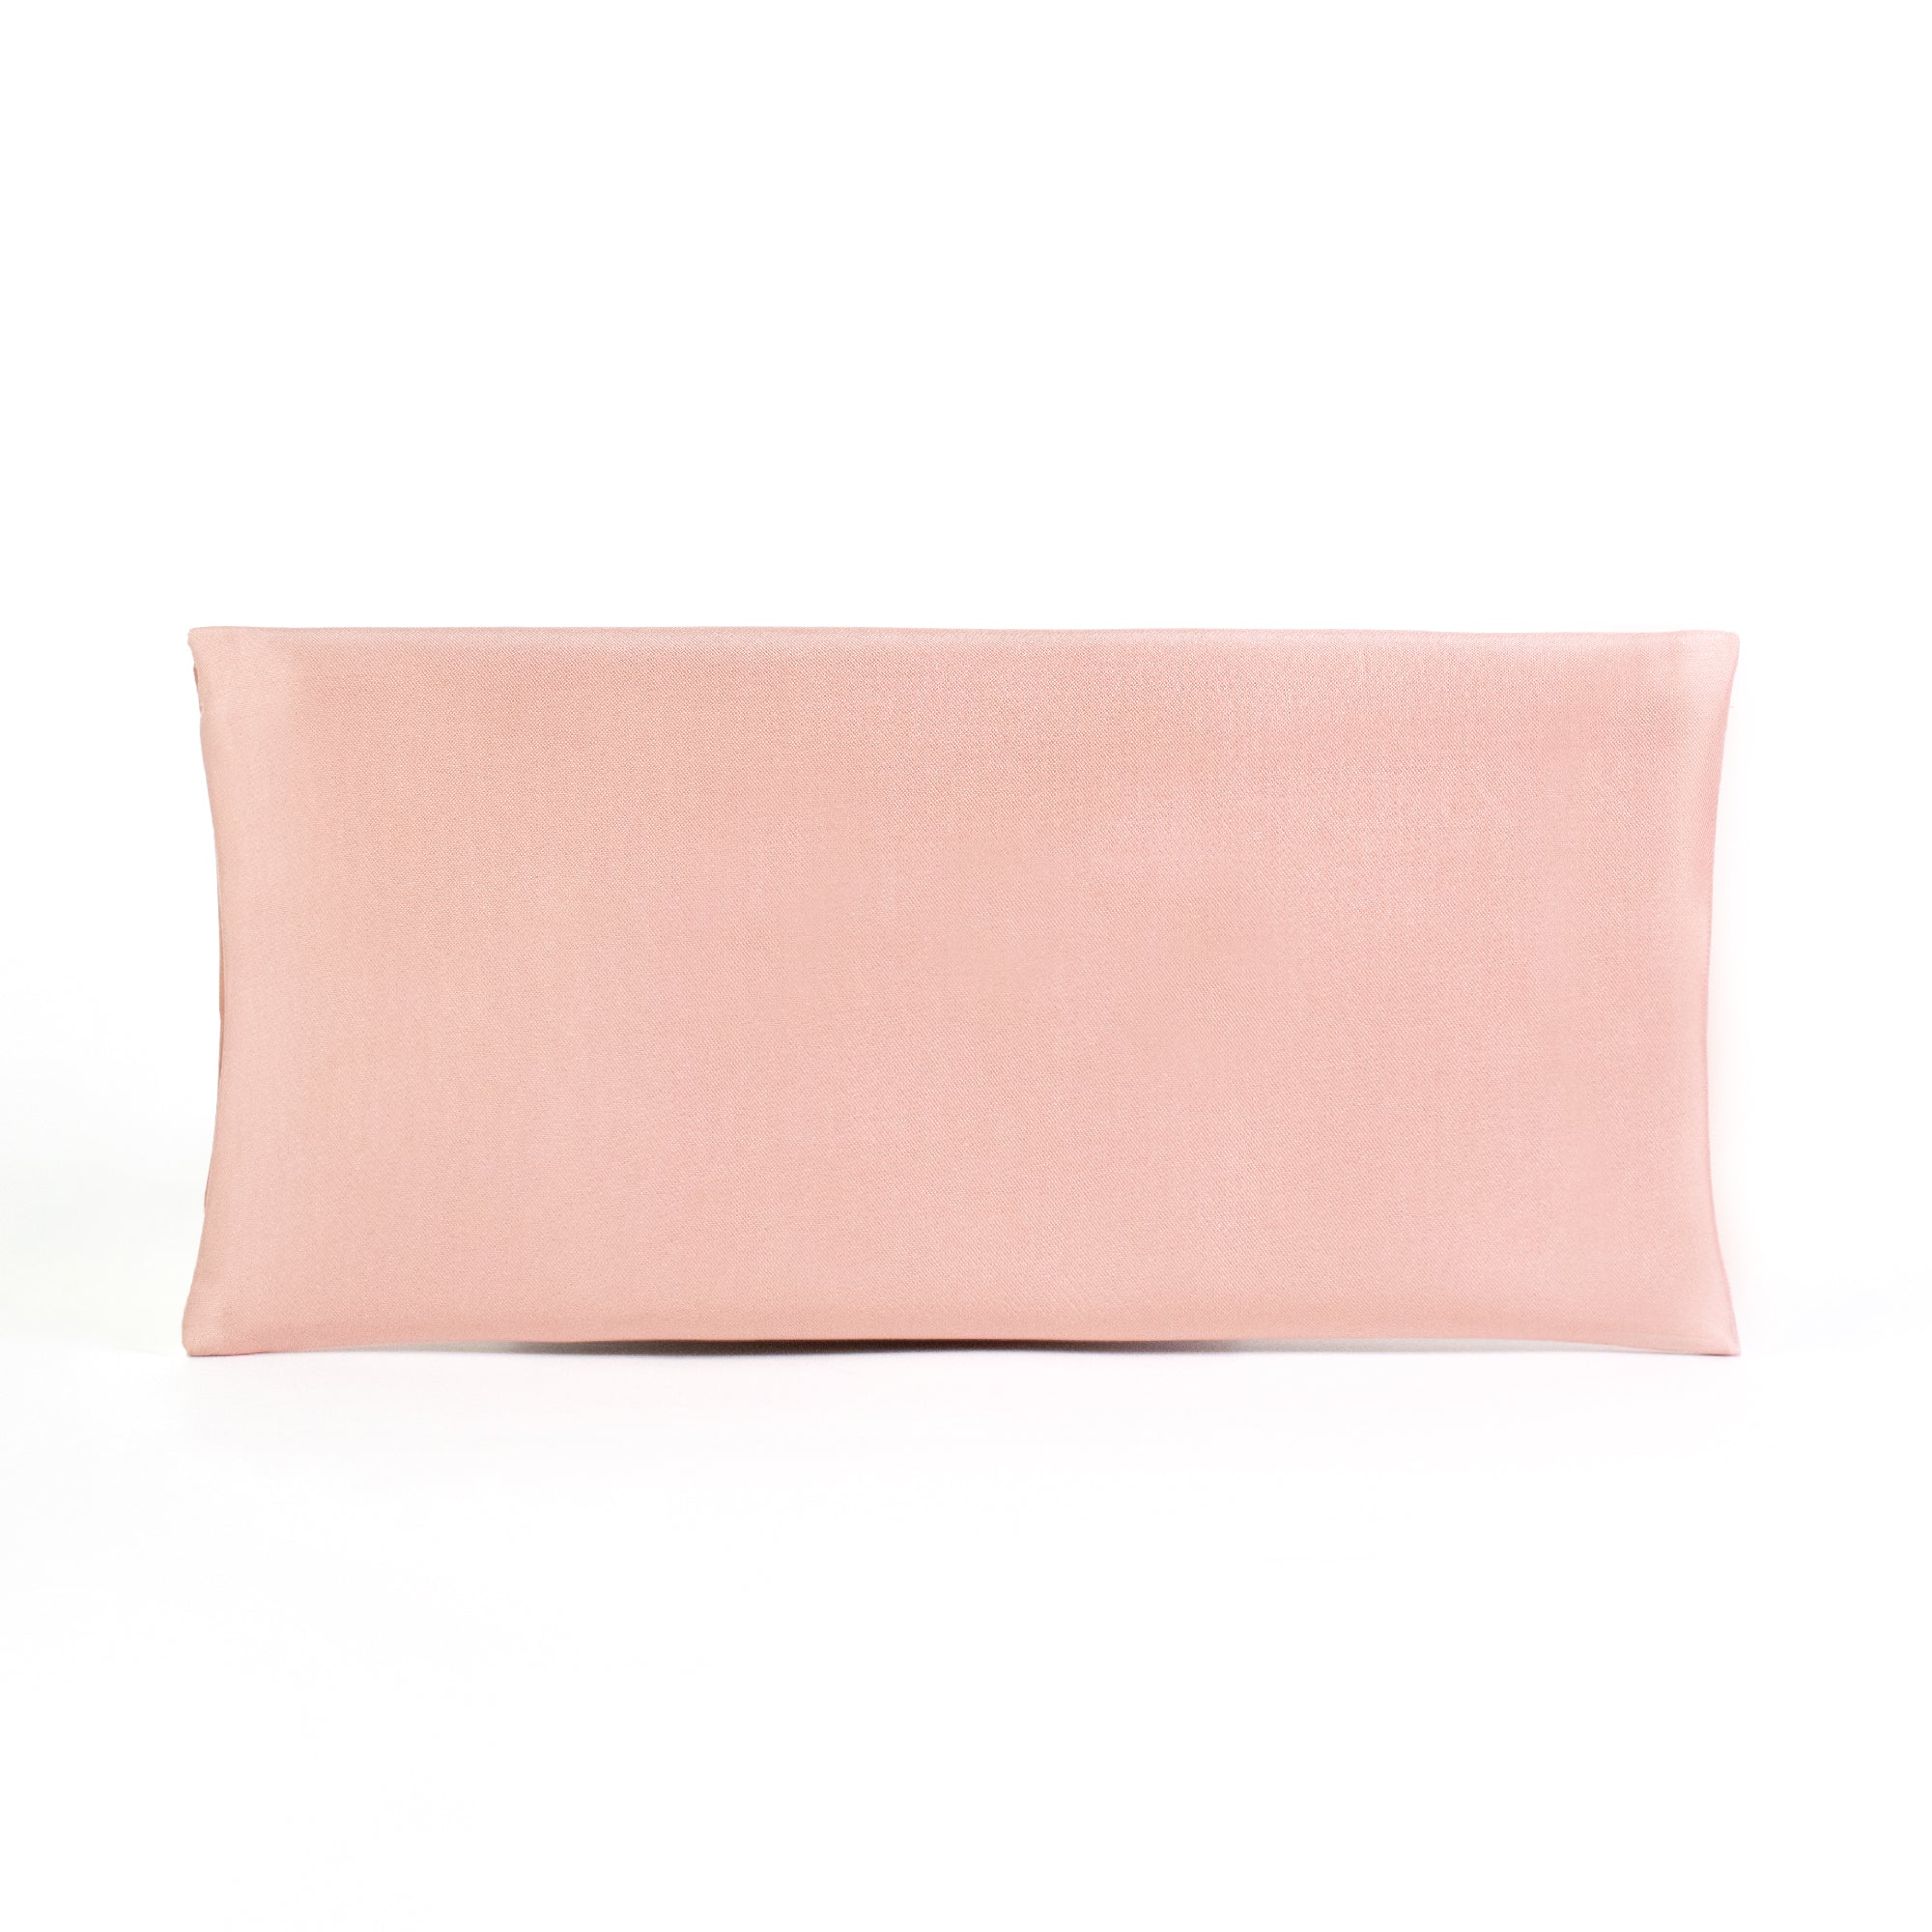 Pink clutch bag with magenta flowers